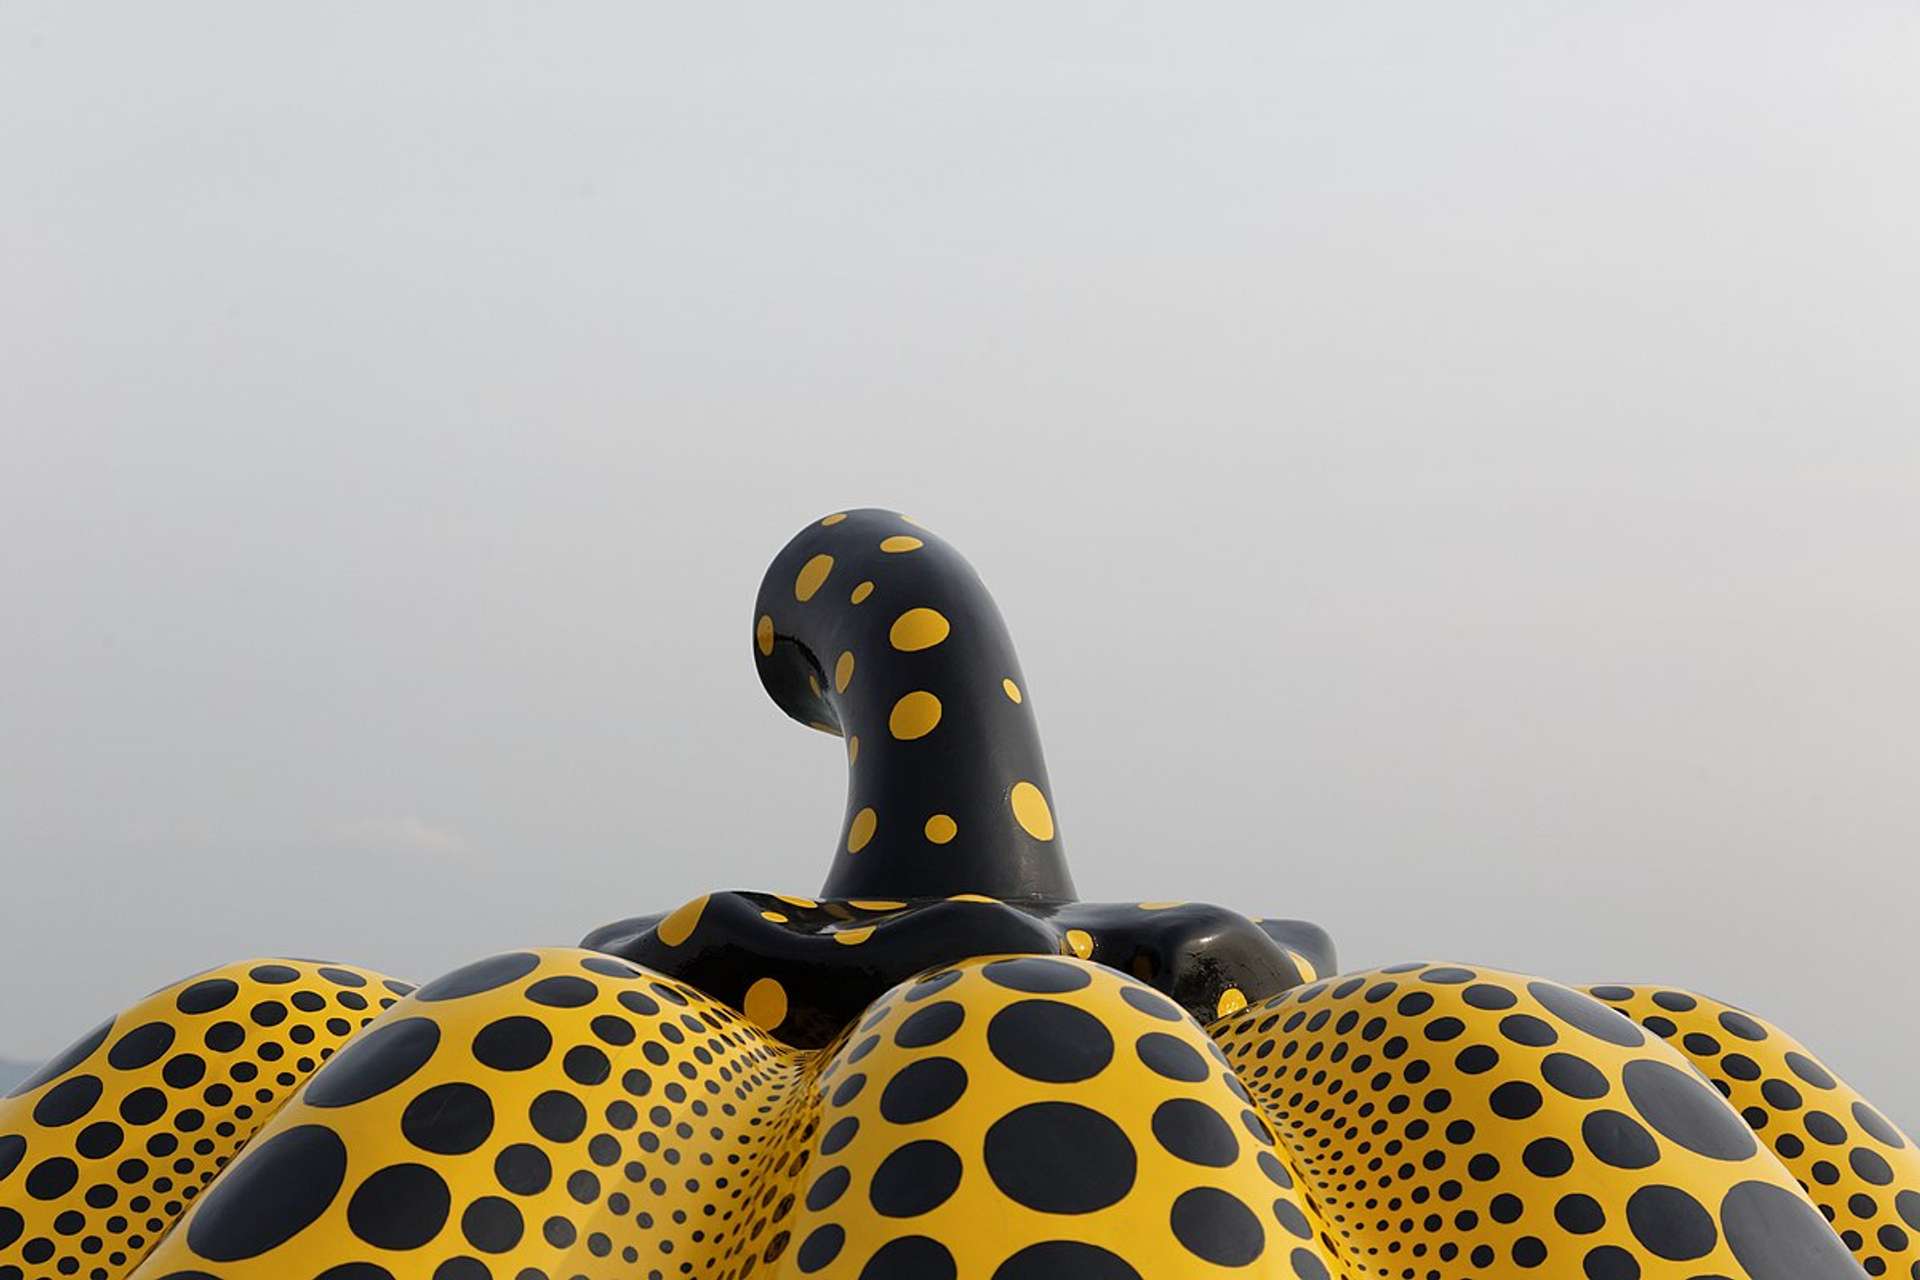 A colour photograph of the top of a black and yellow Yayoi Kusama Pumpkin sculpture, against a white background.